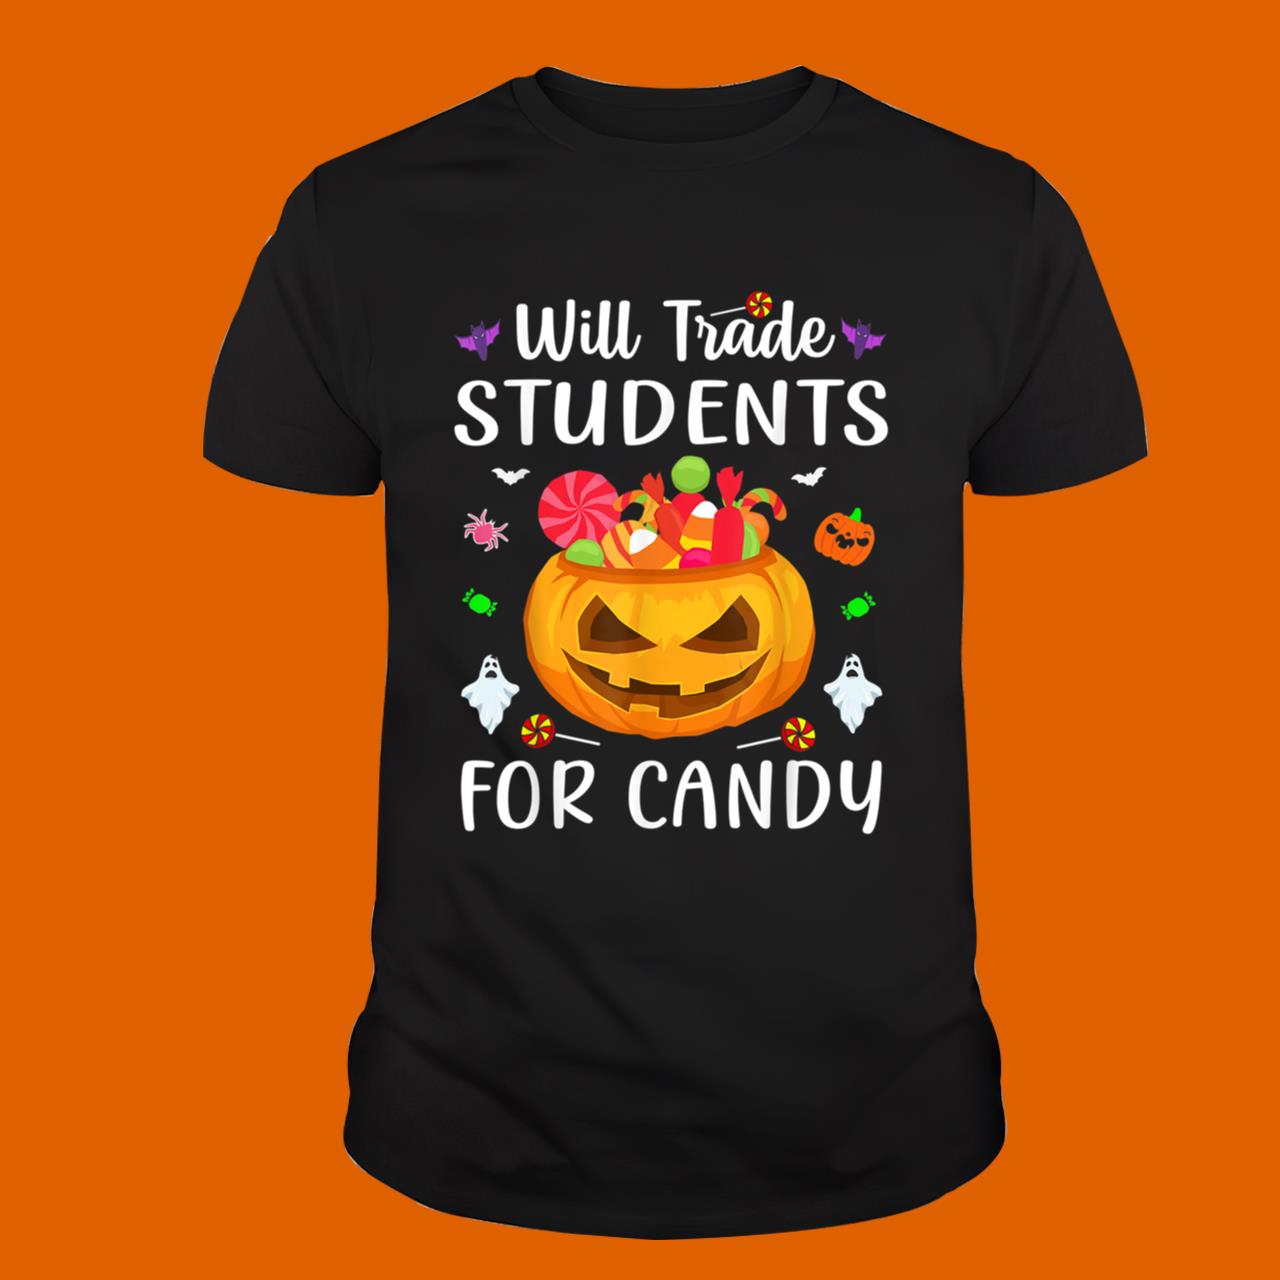 Will Trade Students For Candy Teacher Halloween Costume T-Shirt